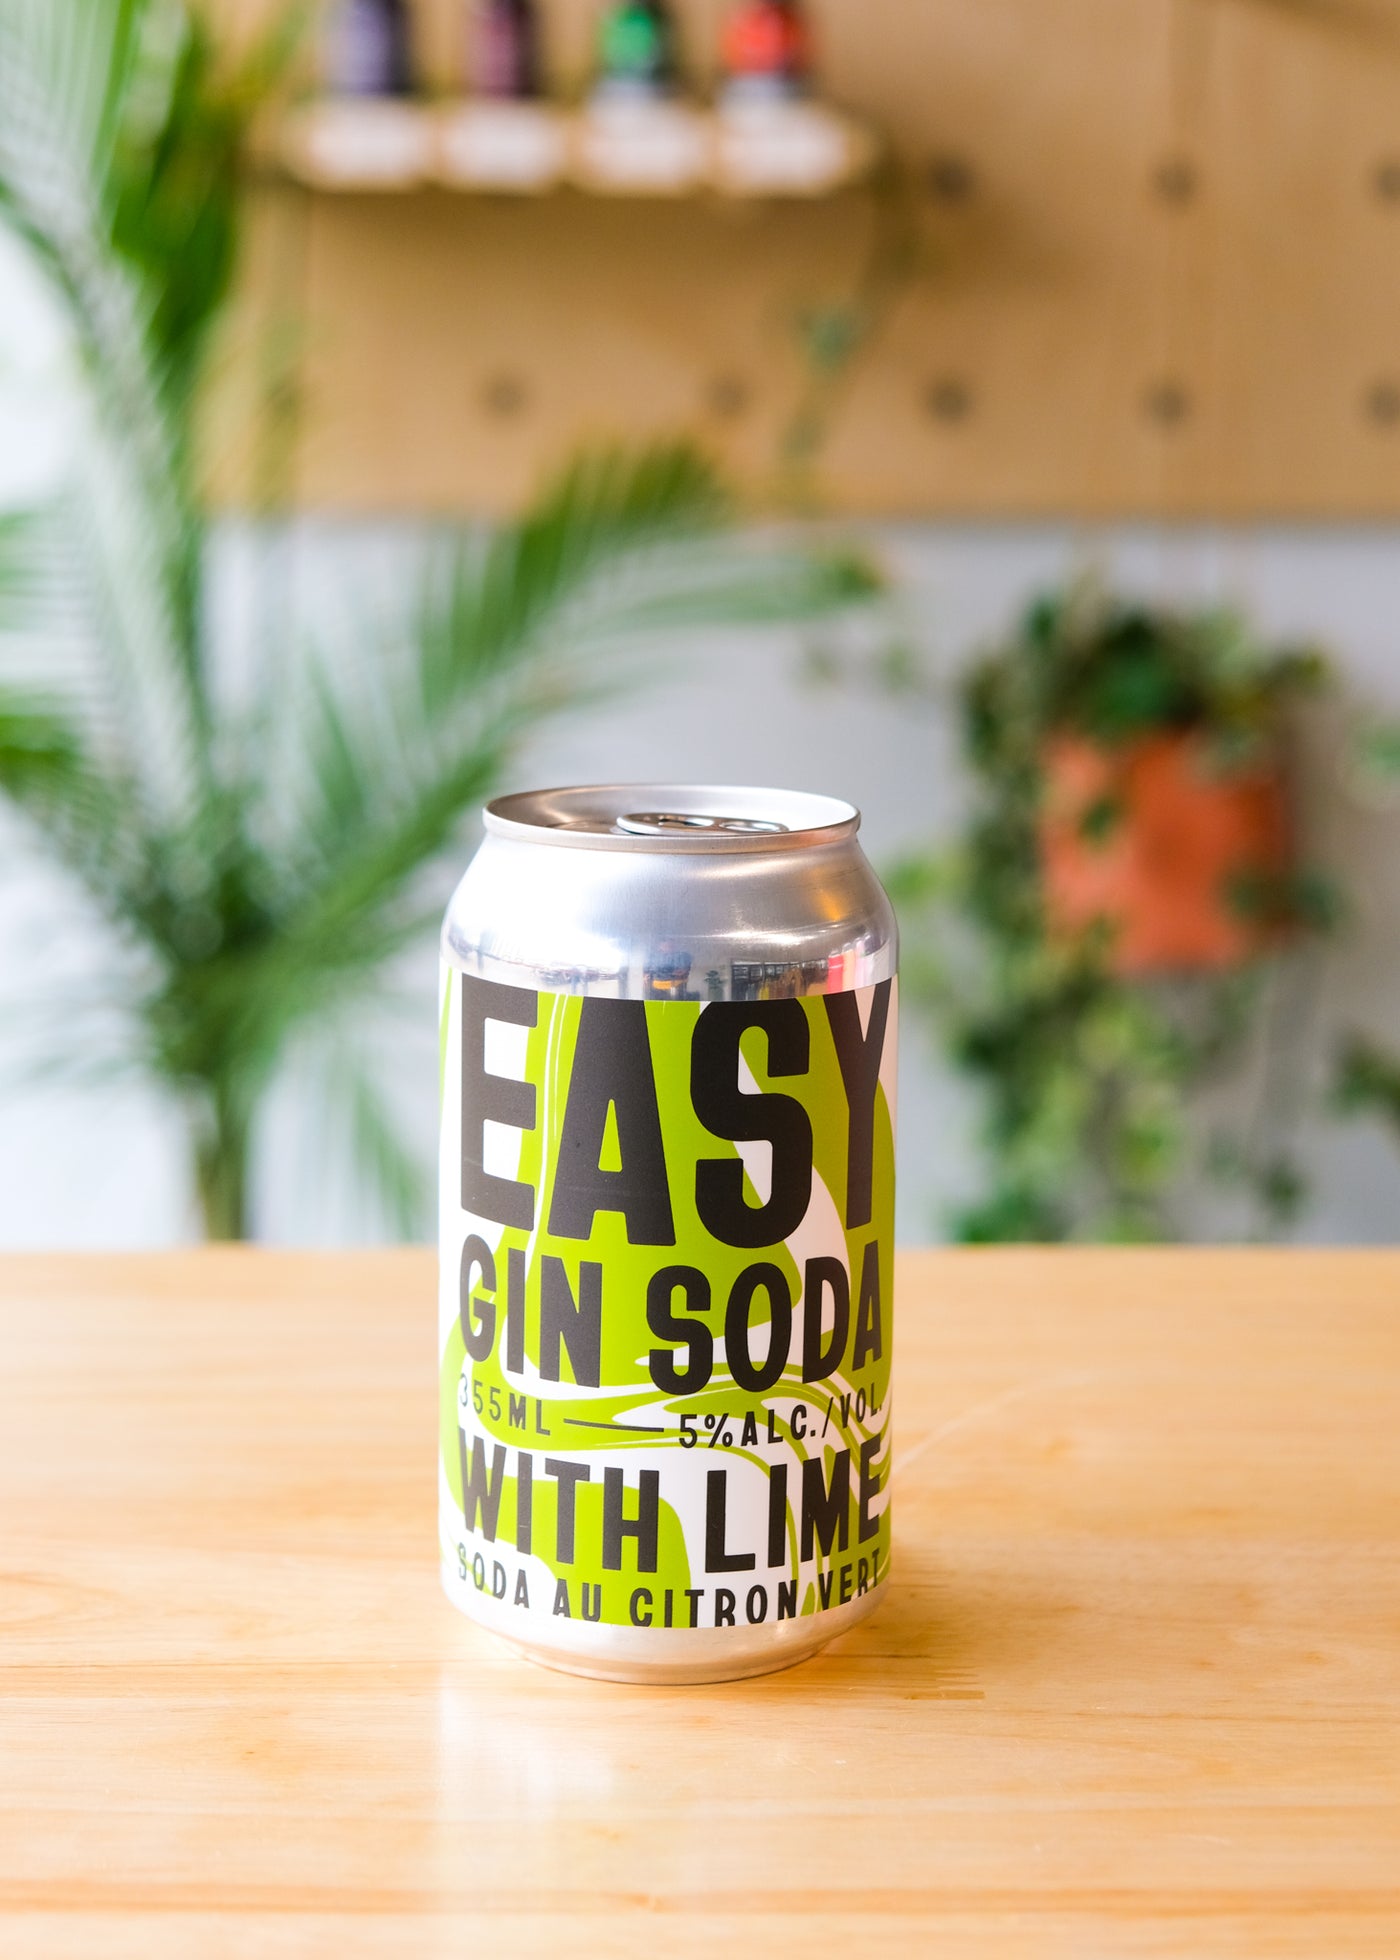 EASY GIN SODA WITH LIME